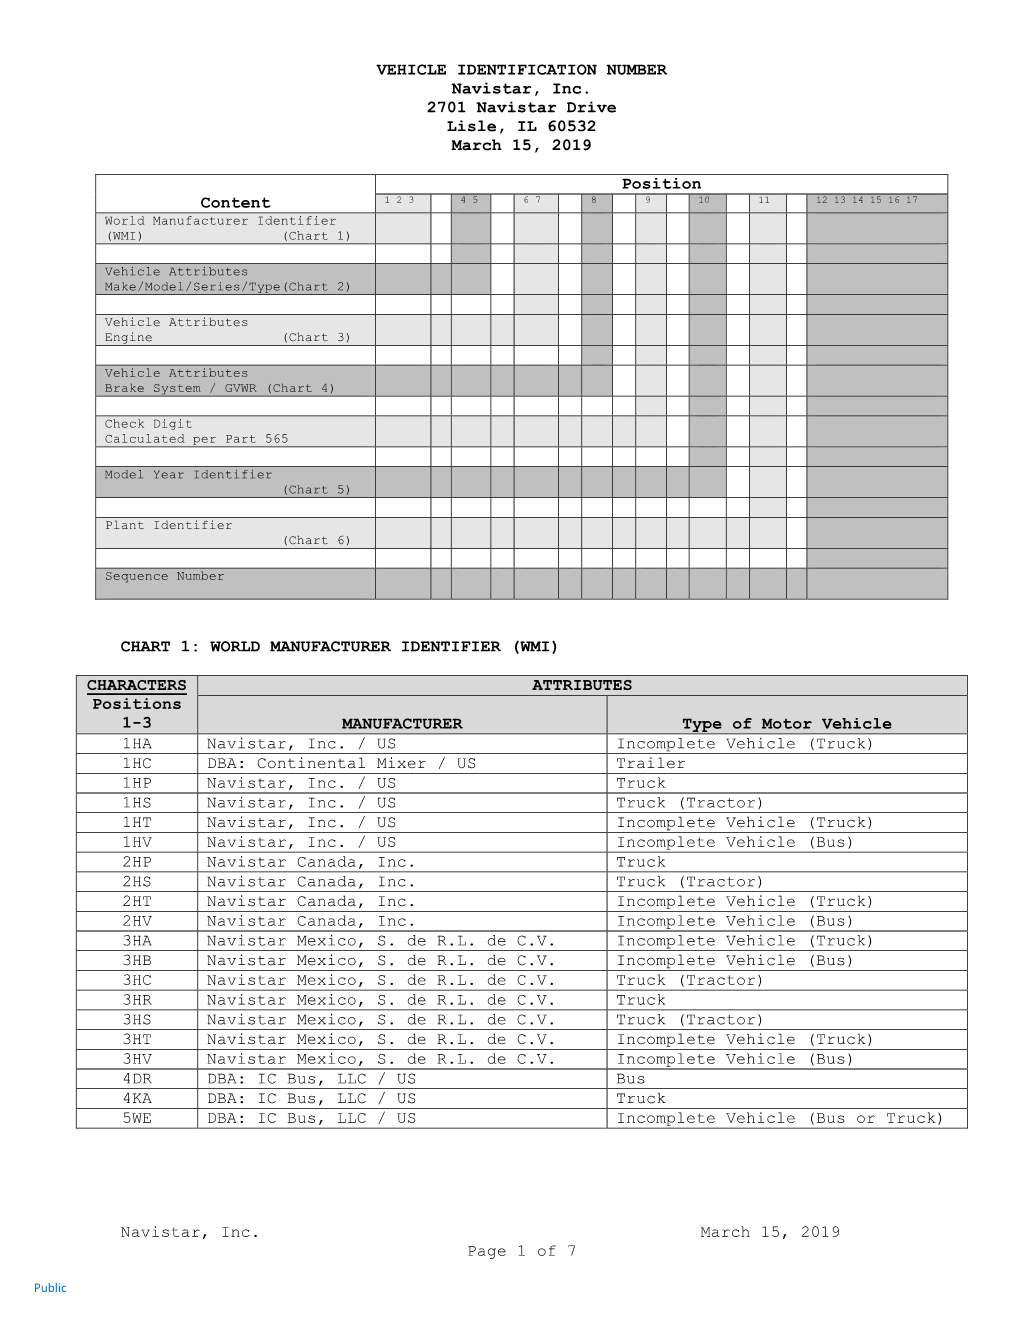 Navistar, Inc. March 15, 2019 Page 1 of 7 VEHICLE IDENTIFICATION